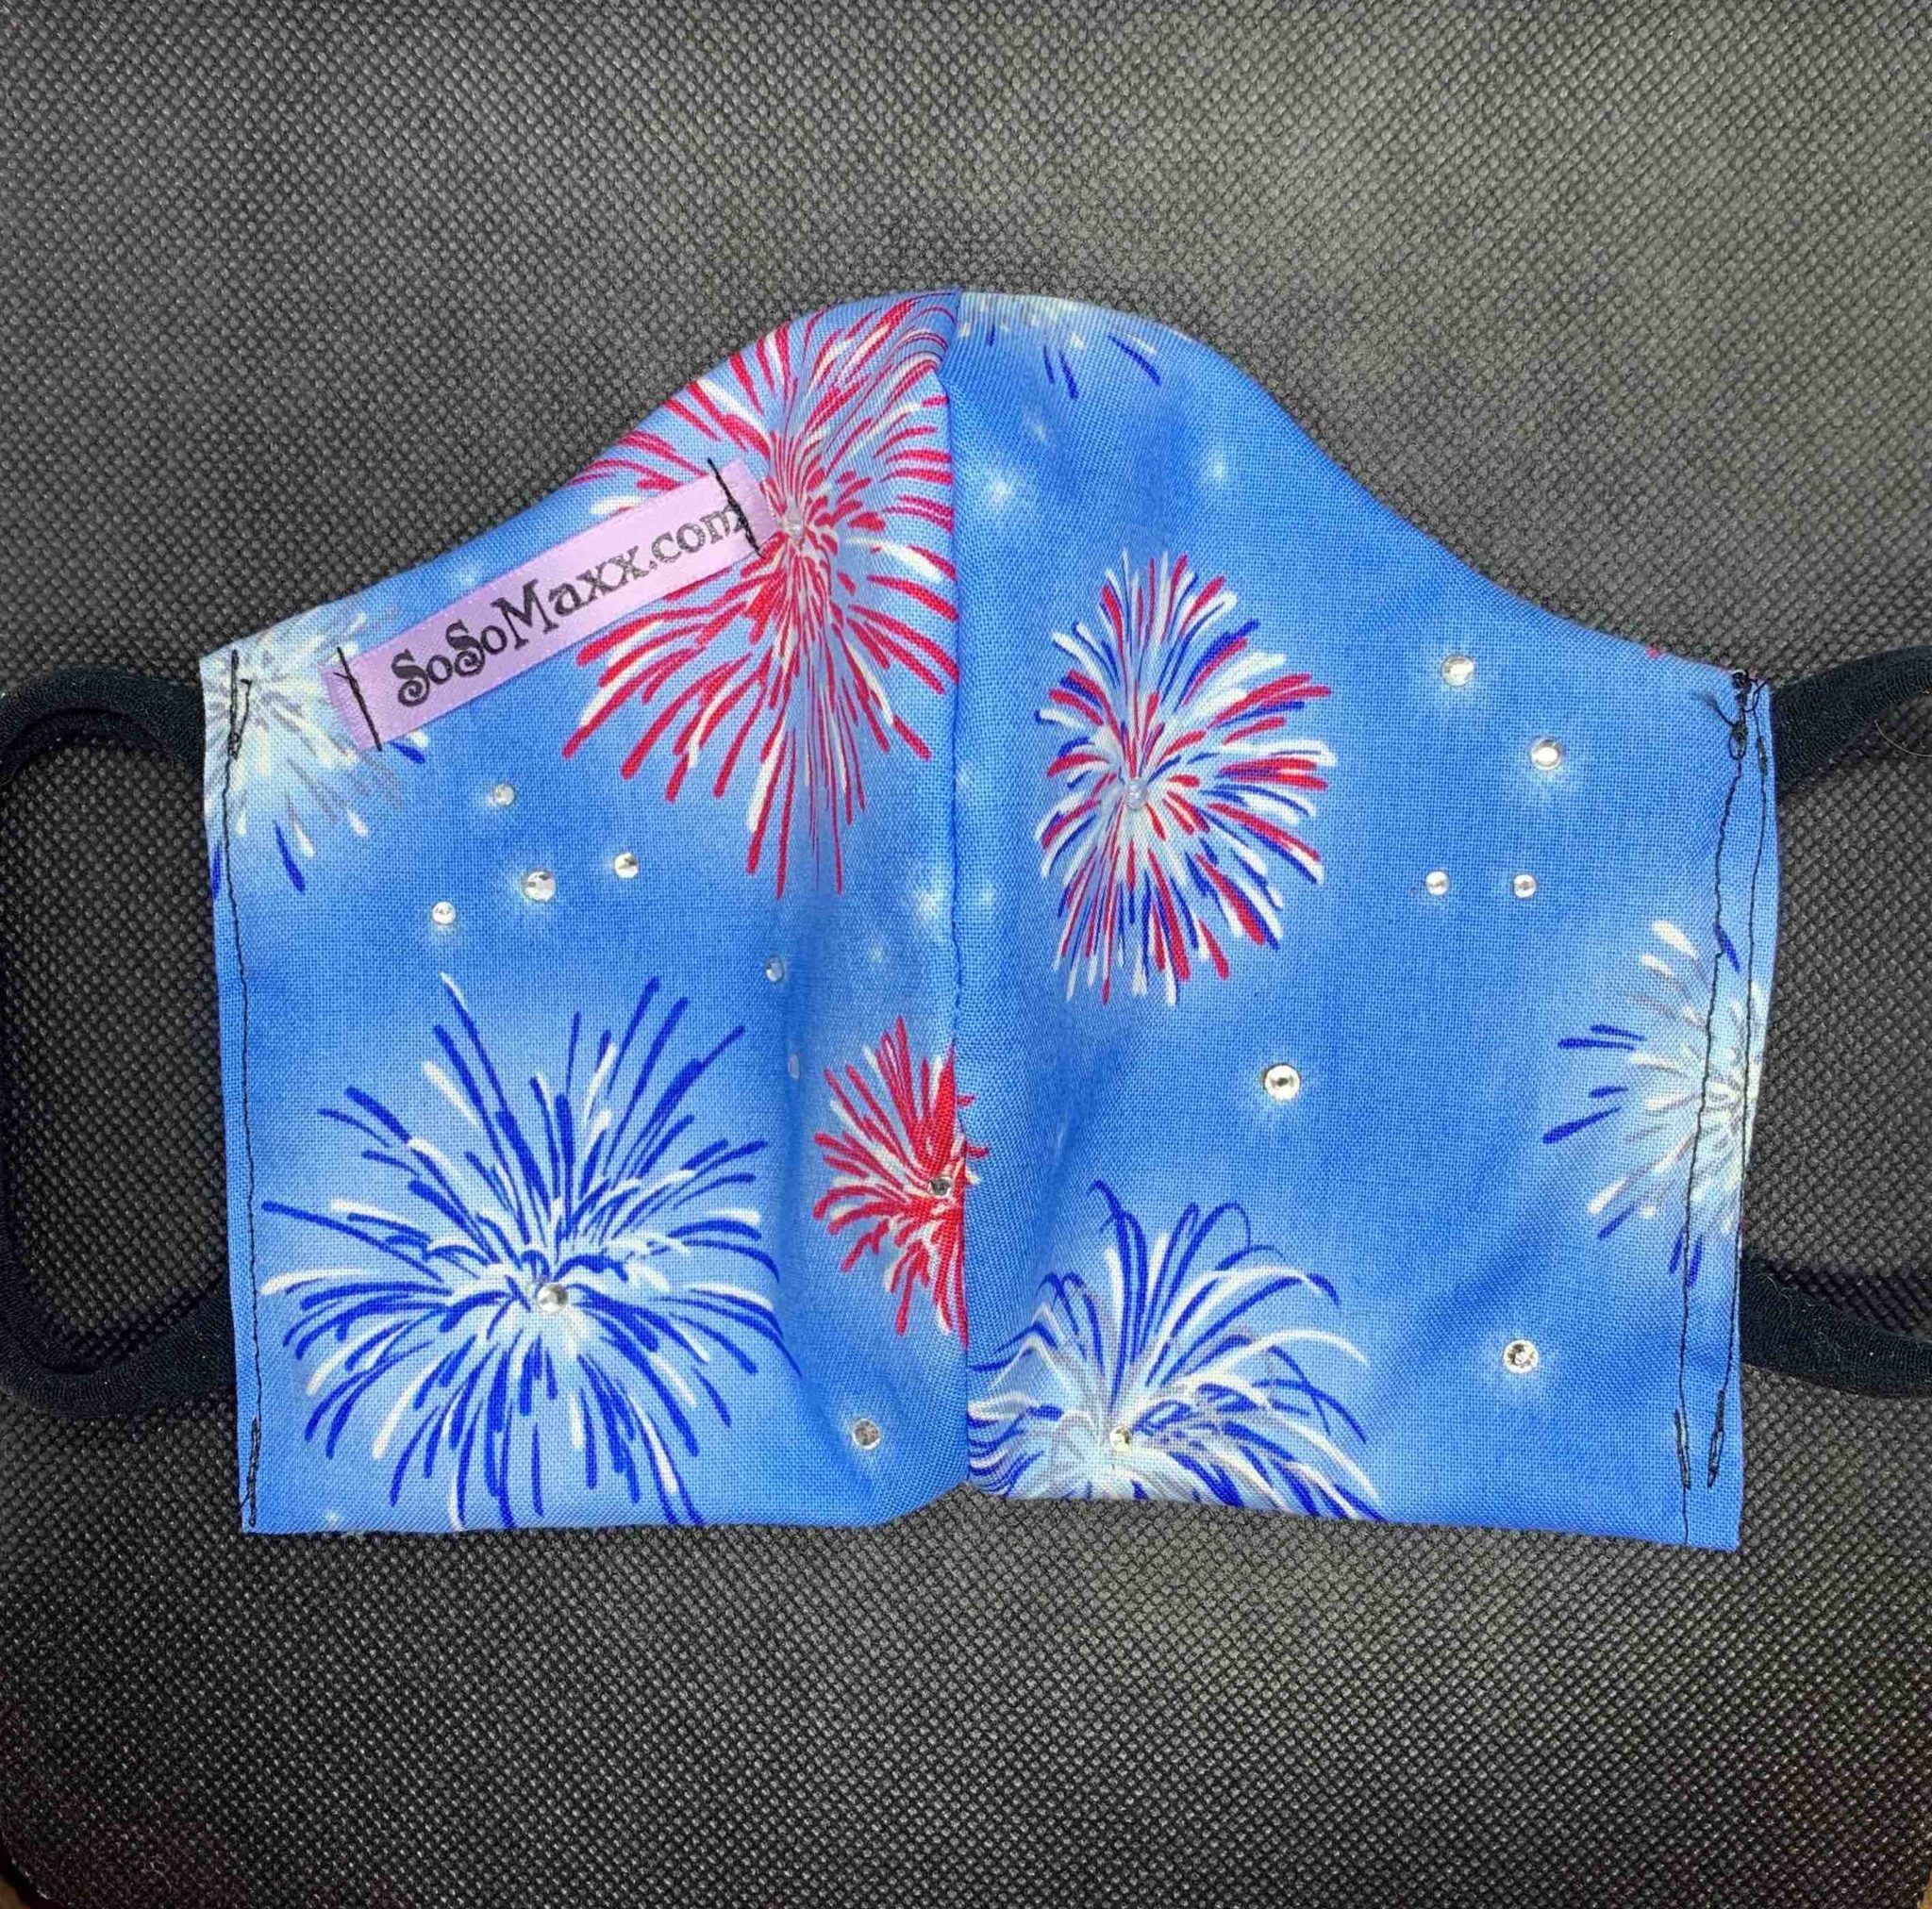 Mask with fireworks prints